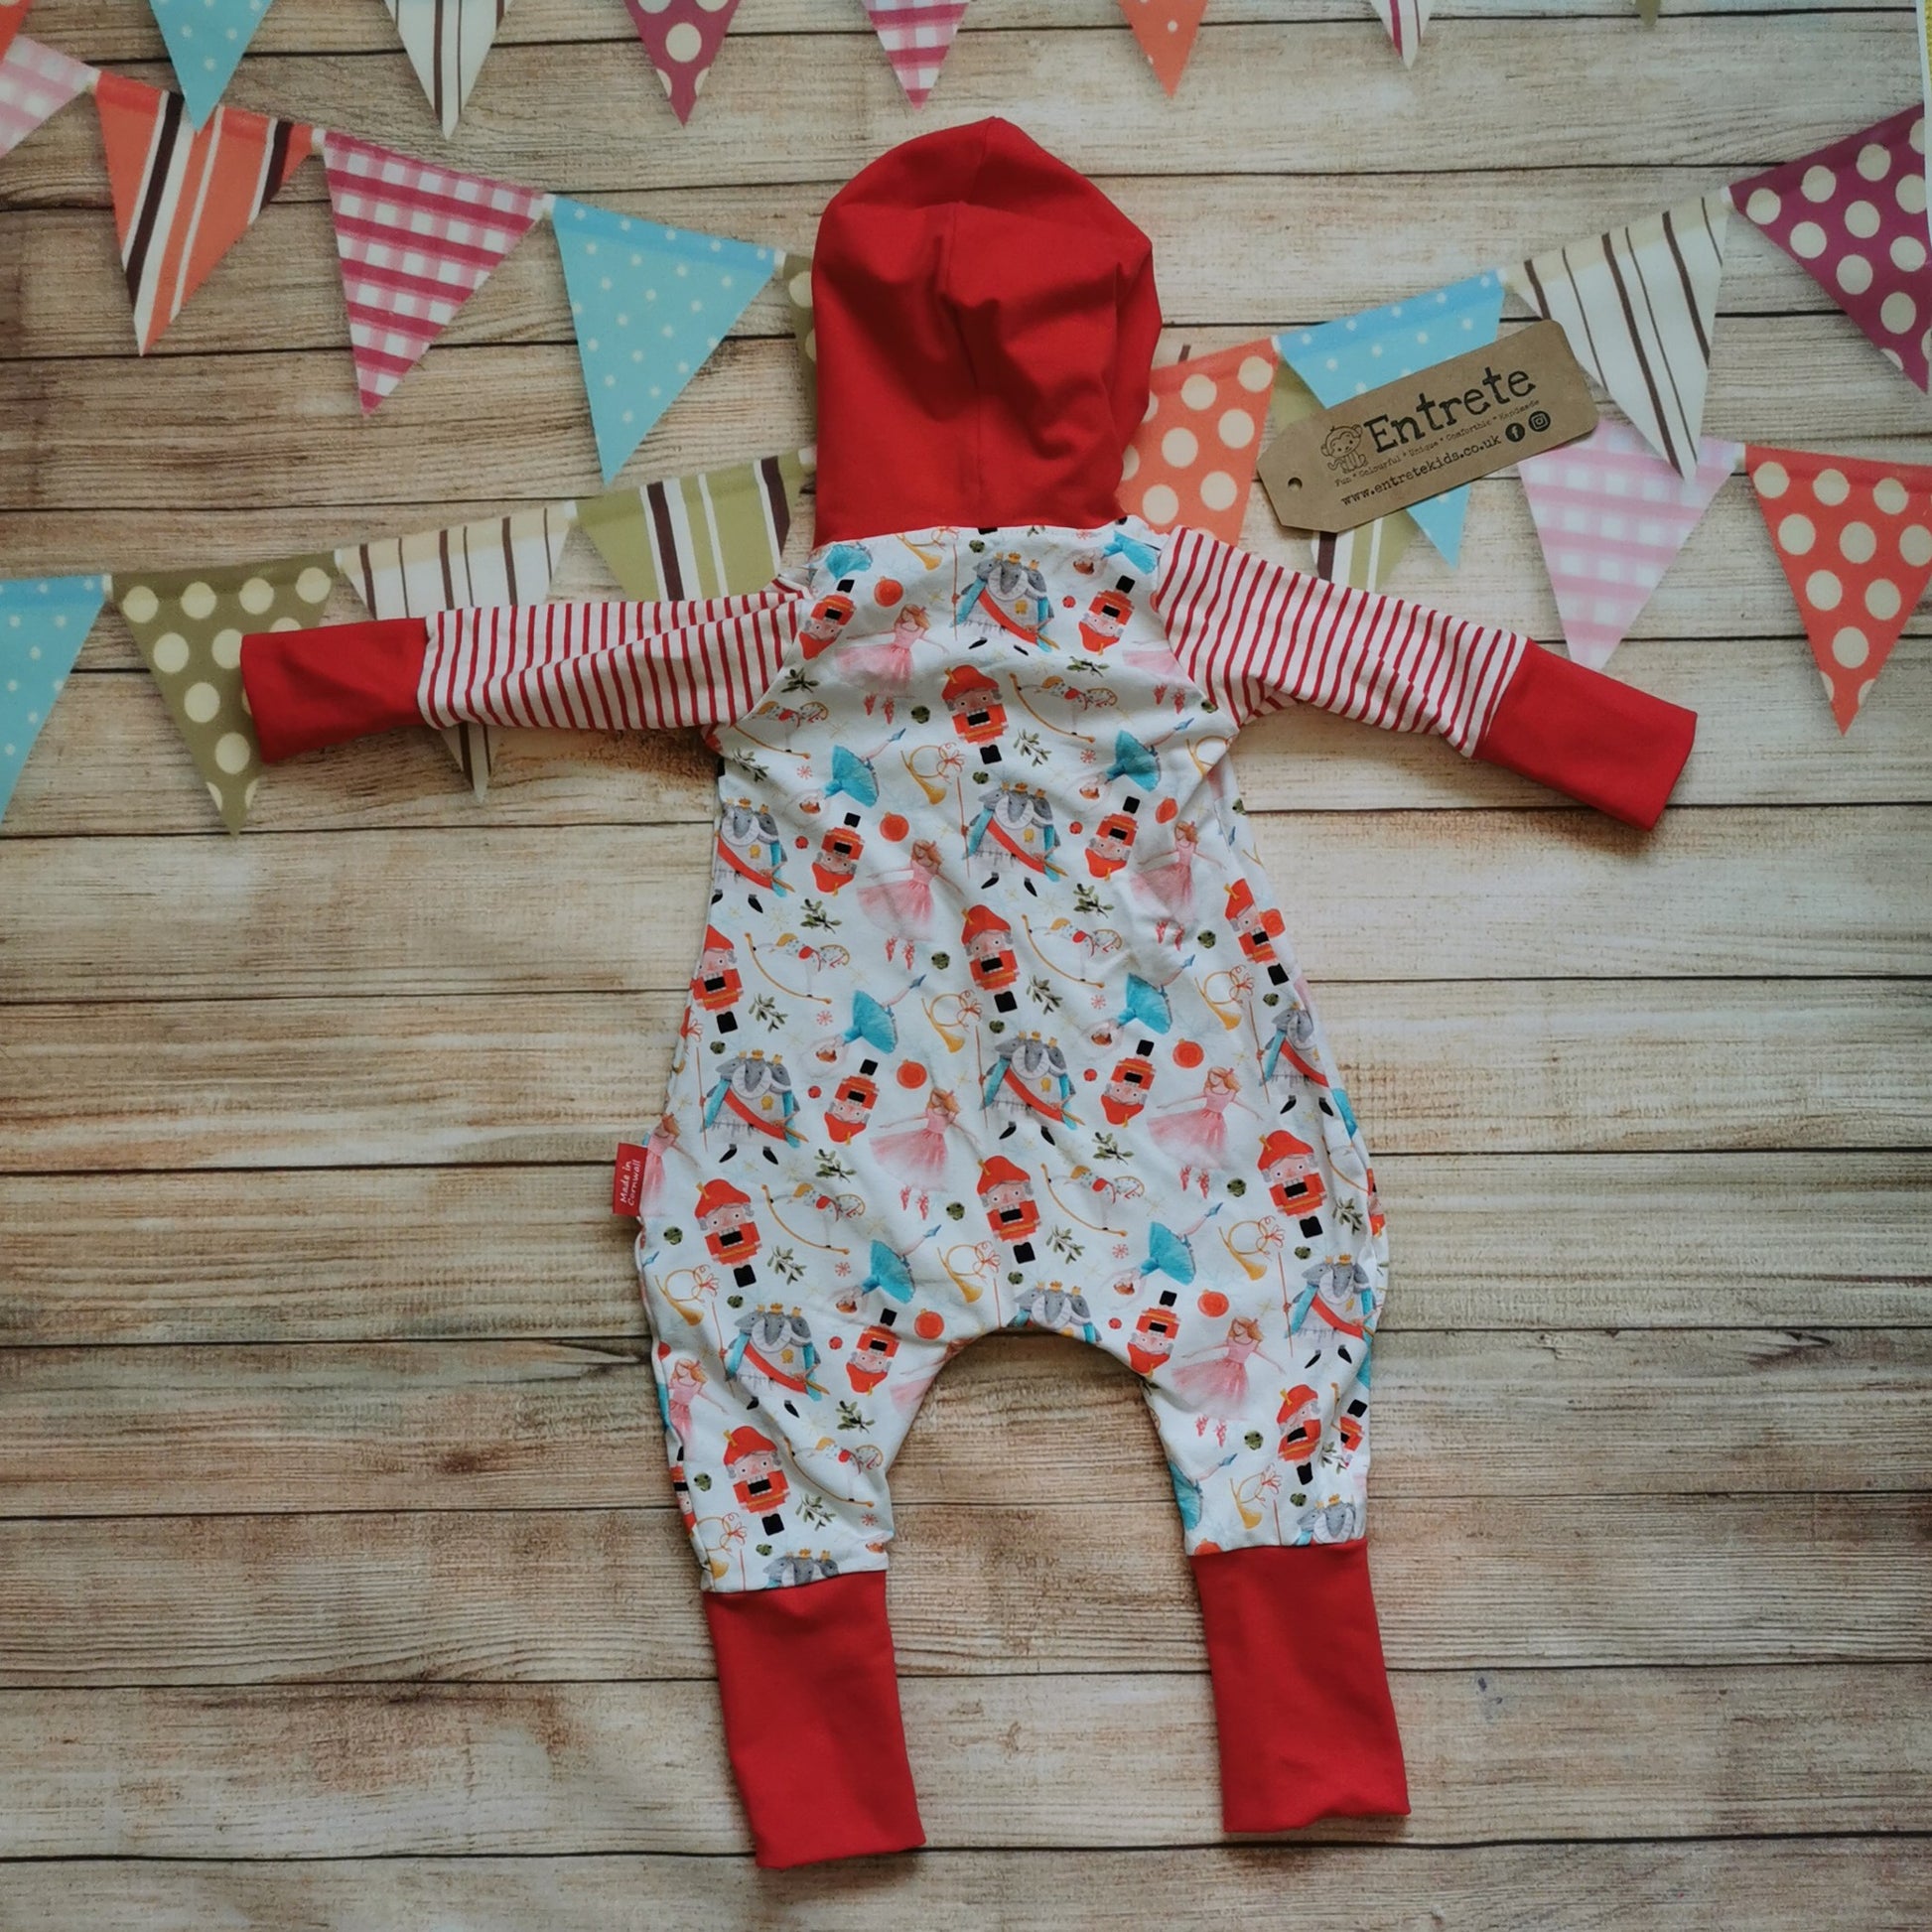 Rear of the gorgeous Christmas nutcracker hooded popper romper. Handmade using white nutcracker, red striped and red cotton jerseys for the perfect Christmas loungewear!